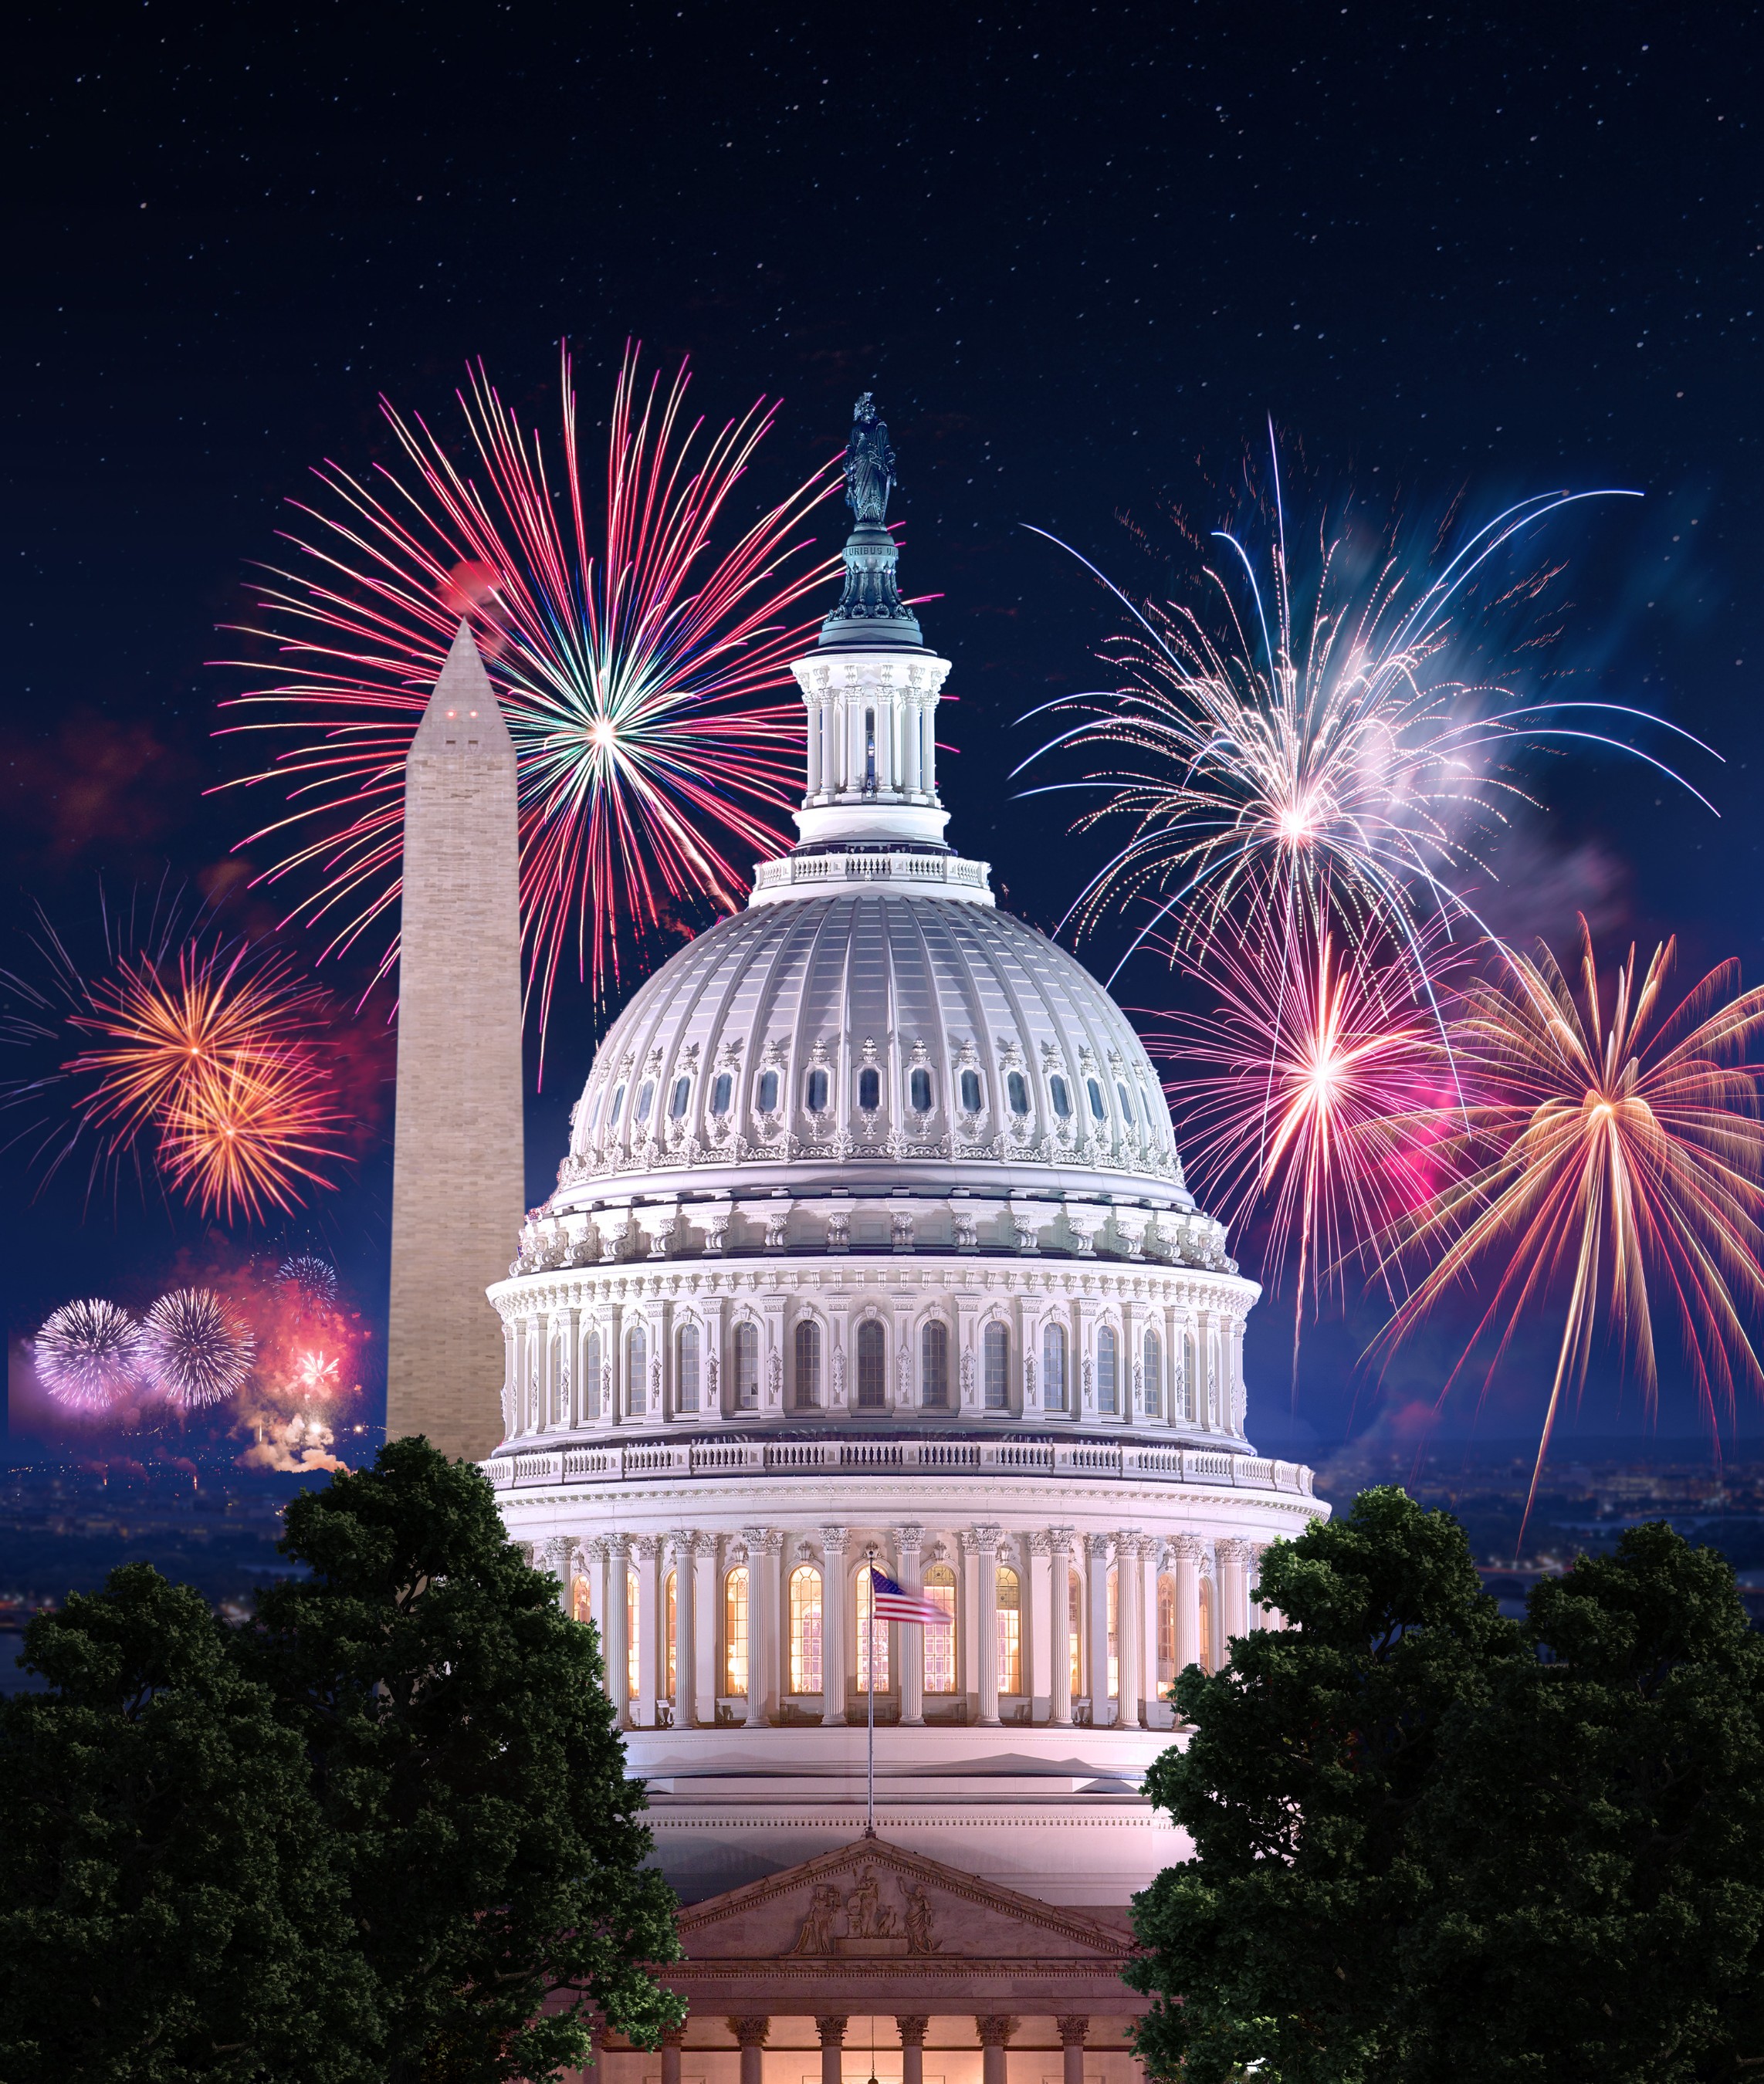 PBS’ A CAPITOL FOURTH AMERICA’S INDEPENDENCE DAY CELEBRATION